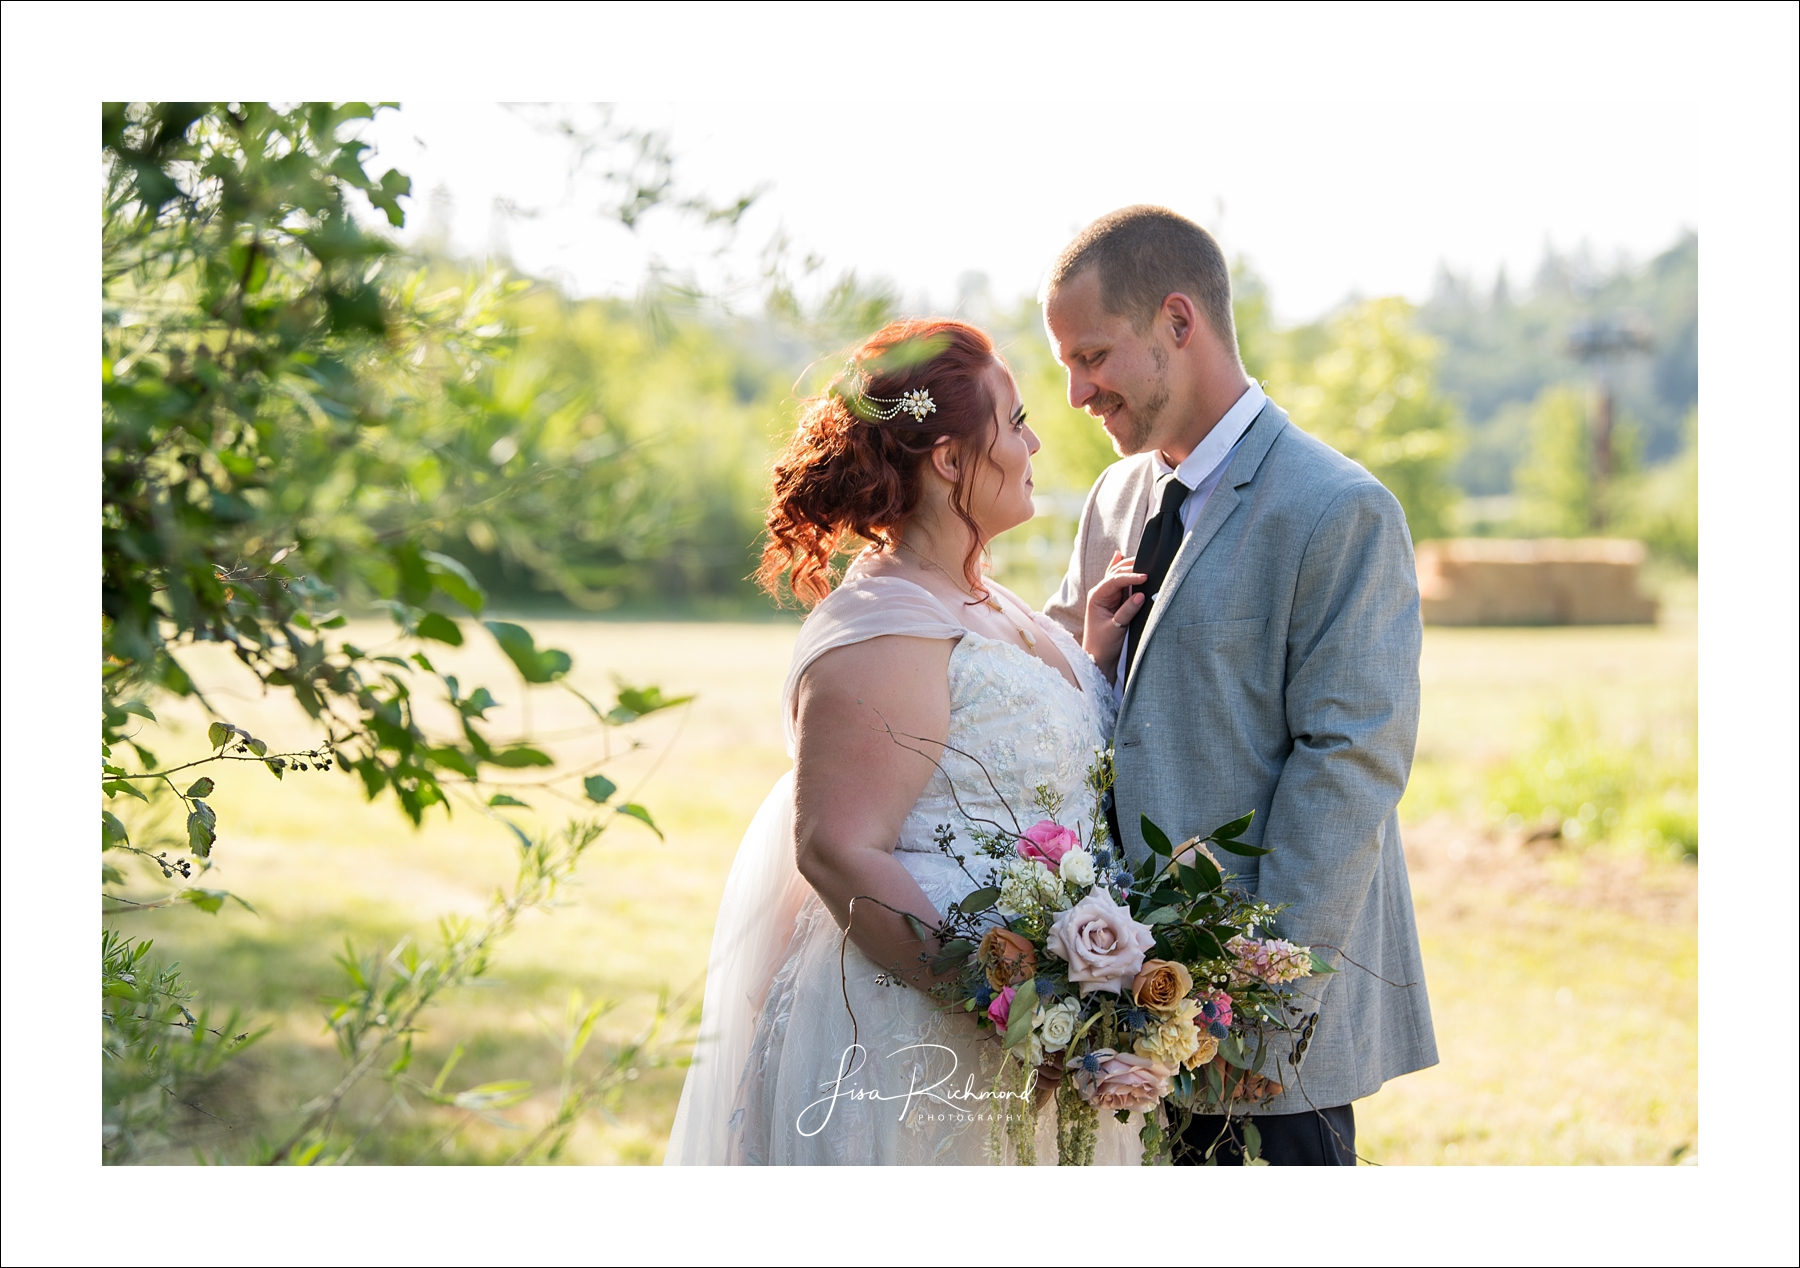 Mariah + Charlie at Bluestone Meadow, Placerville, California